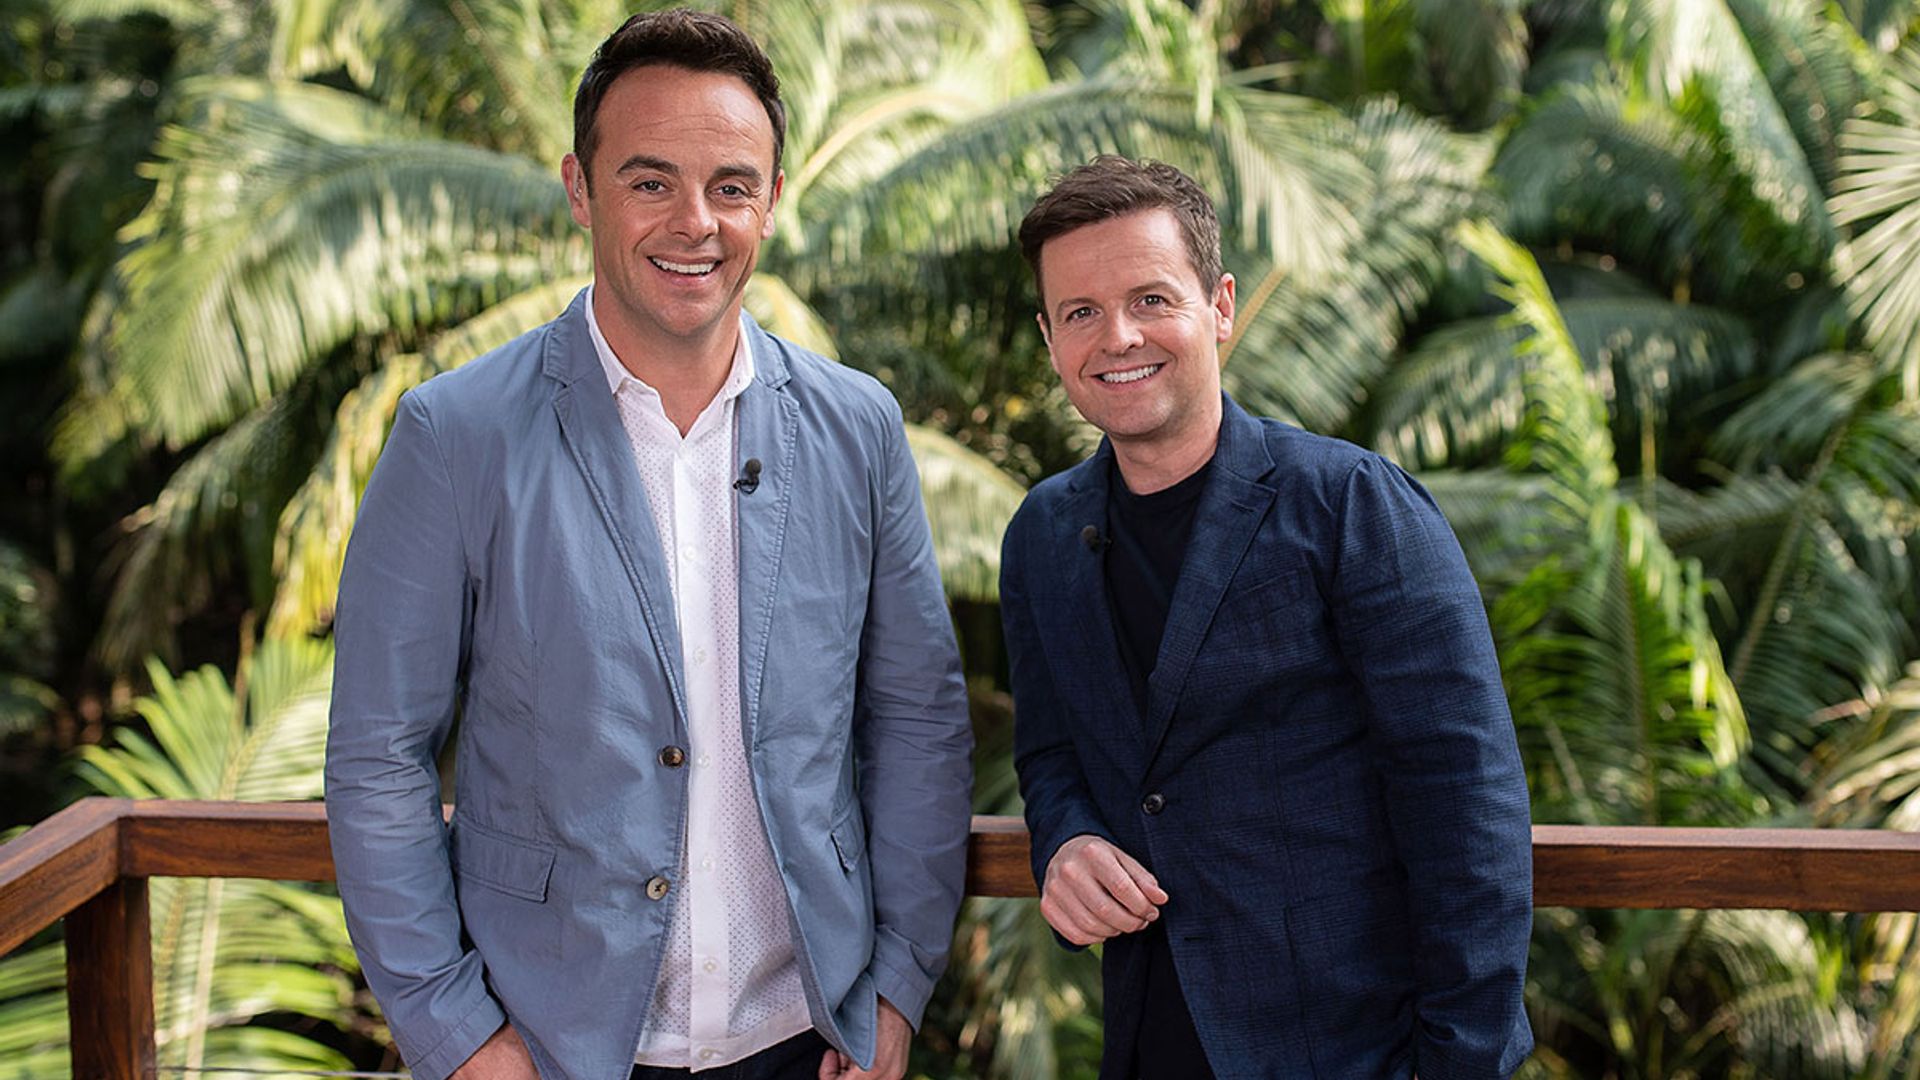 I'm A Celebrity: Last minute change made ahead of 2020 series